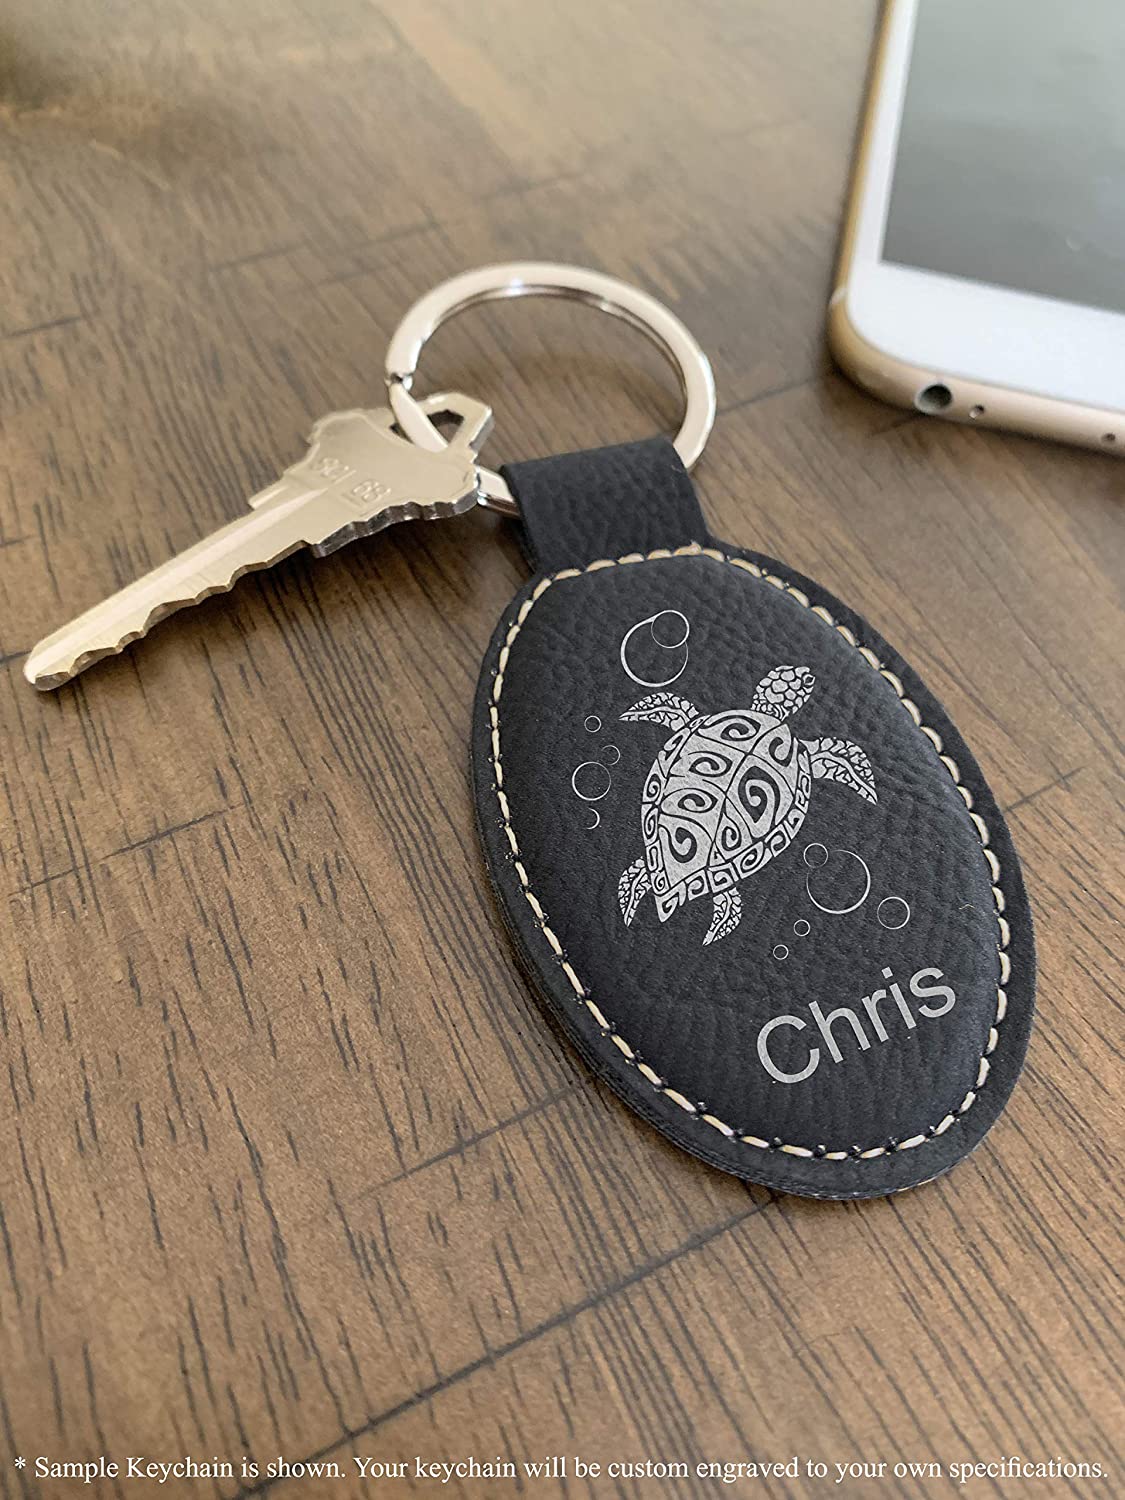 Faux Leather Oval Keychain, World's Greatest Niece, Personalized Engraving Included